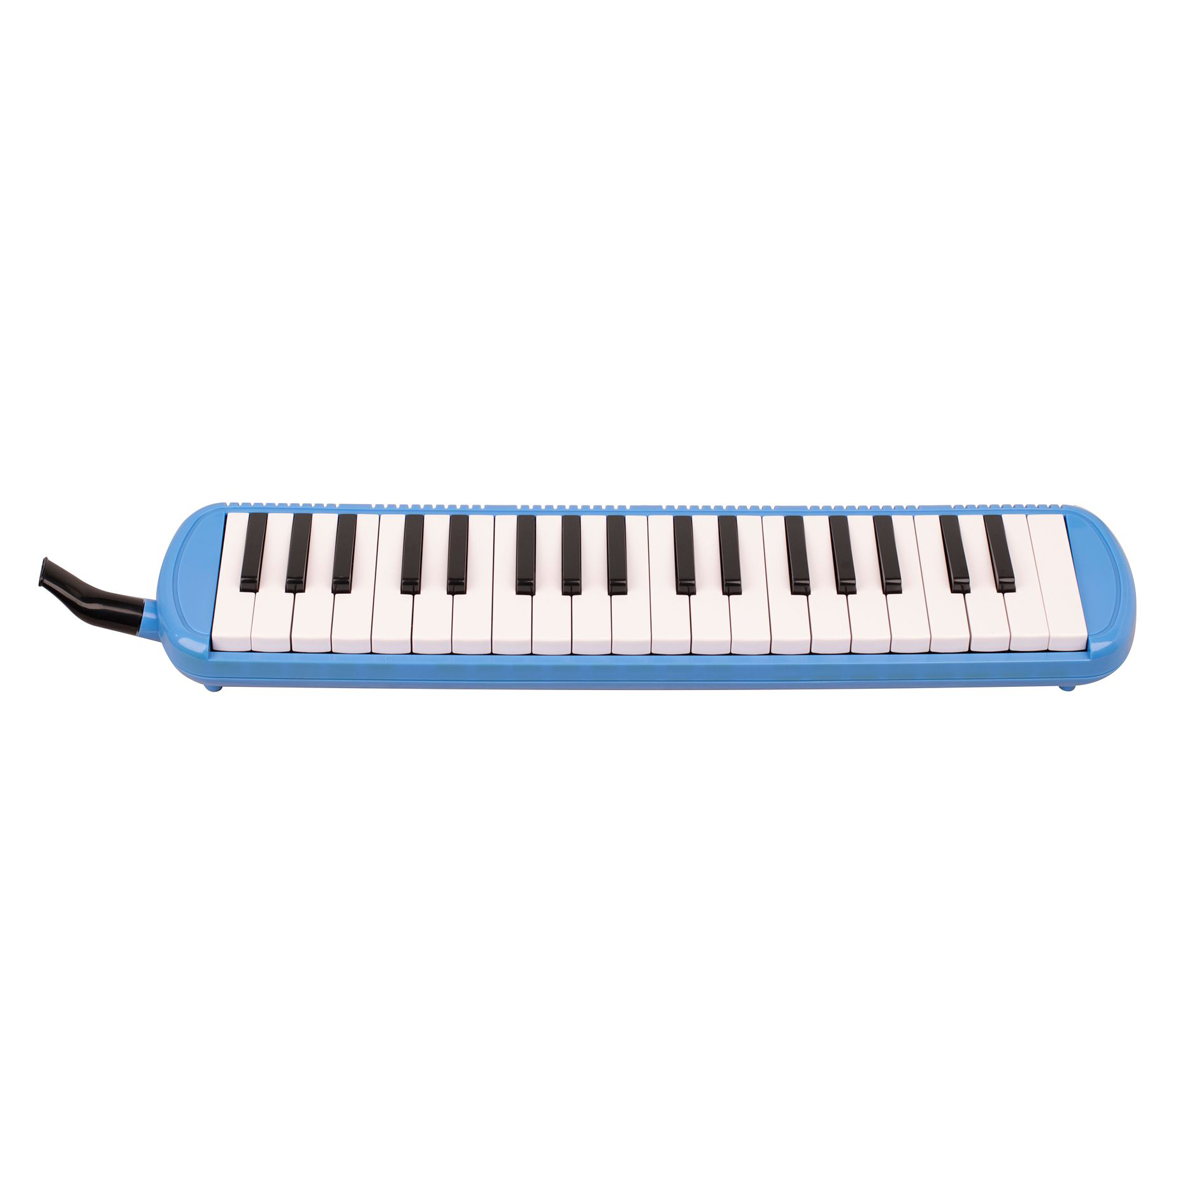 Son of drum - 32 Note Melodica with Bag - Blue